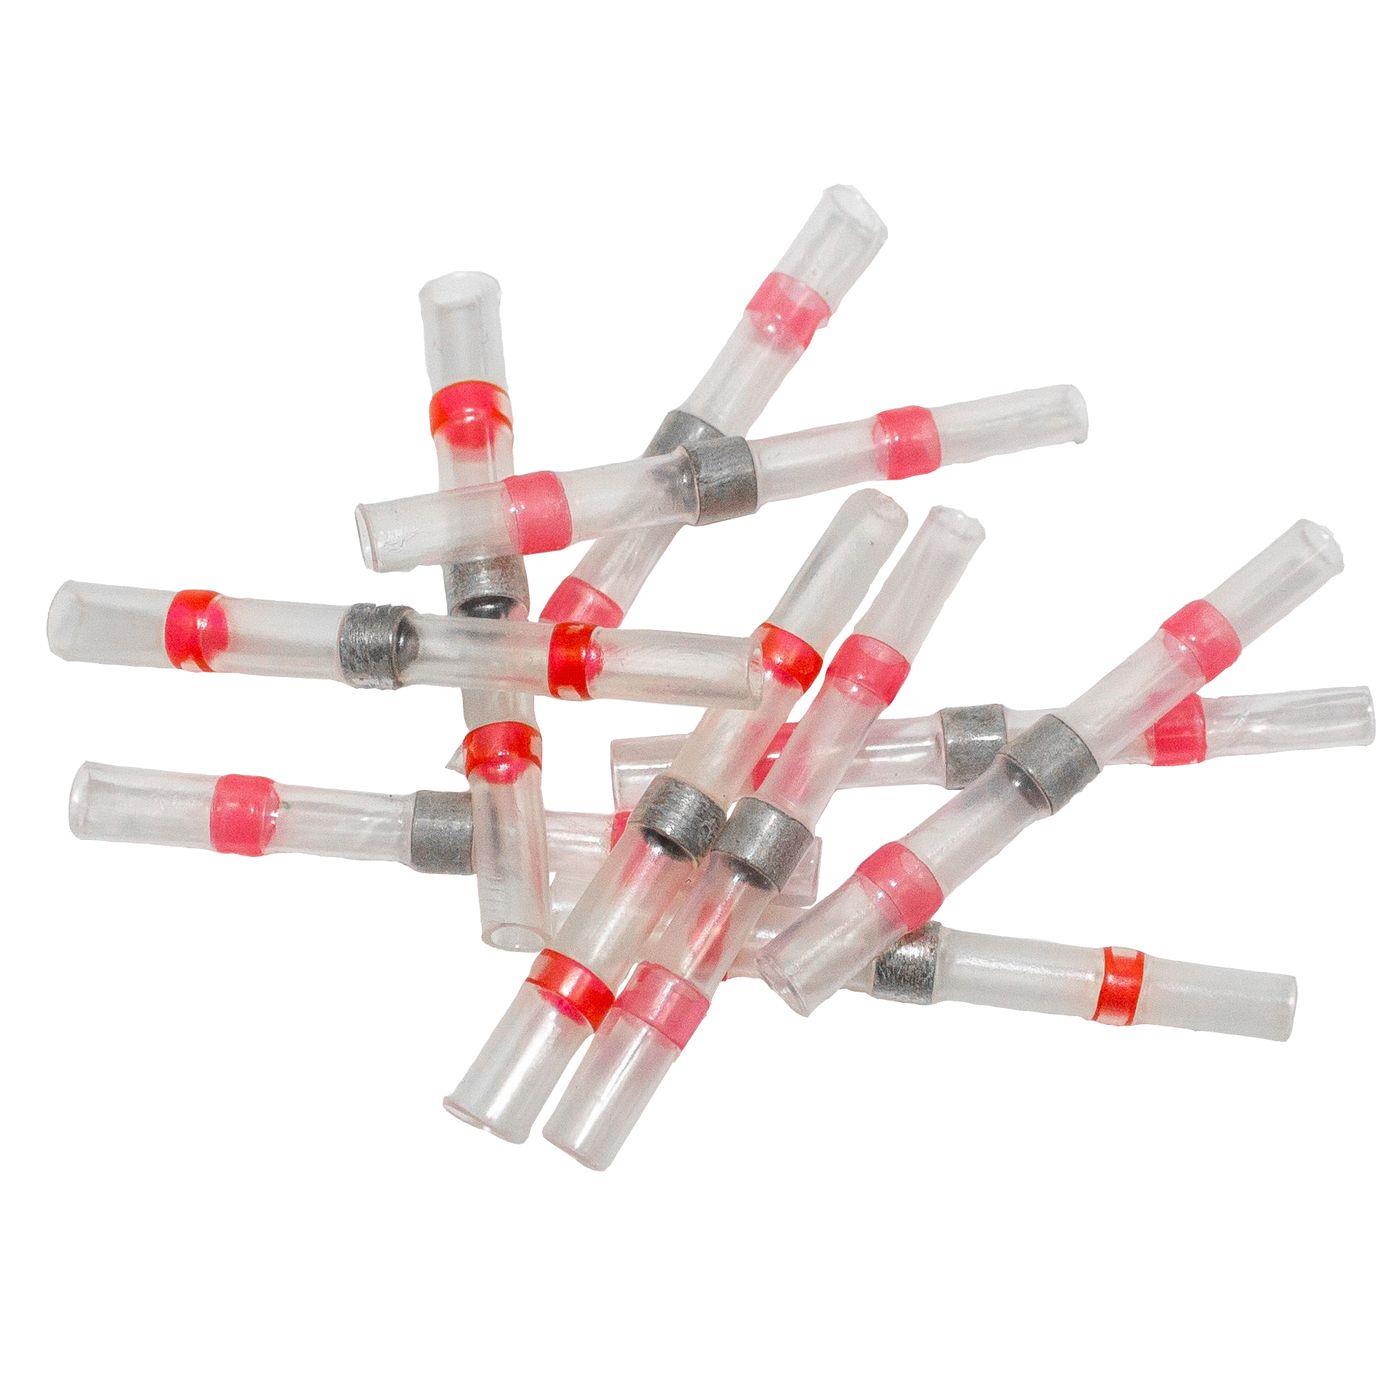 10x Shrink solder connector  with heat shrink tubing 0,5-1,5mm² Red HeatShrink Cable connector IP67